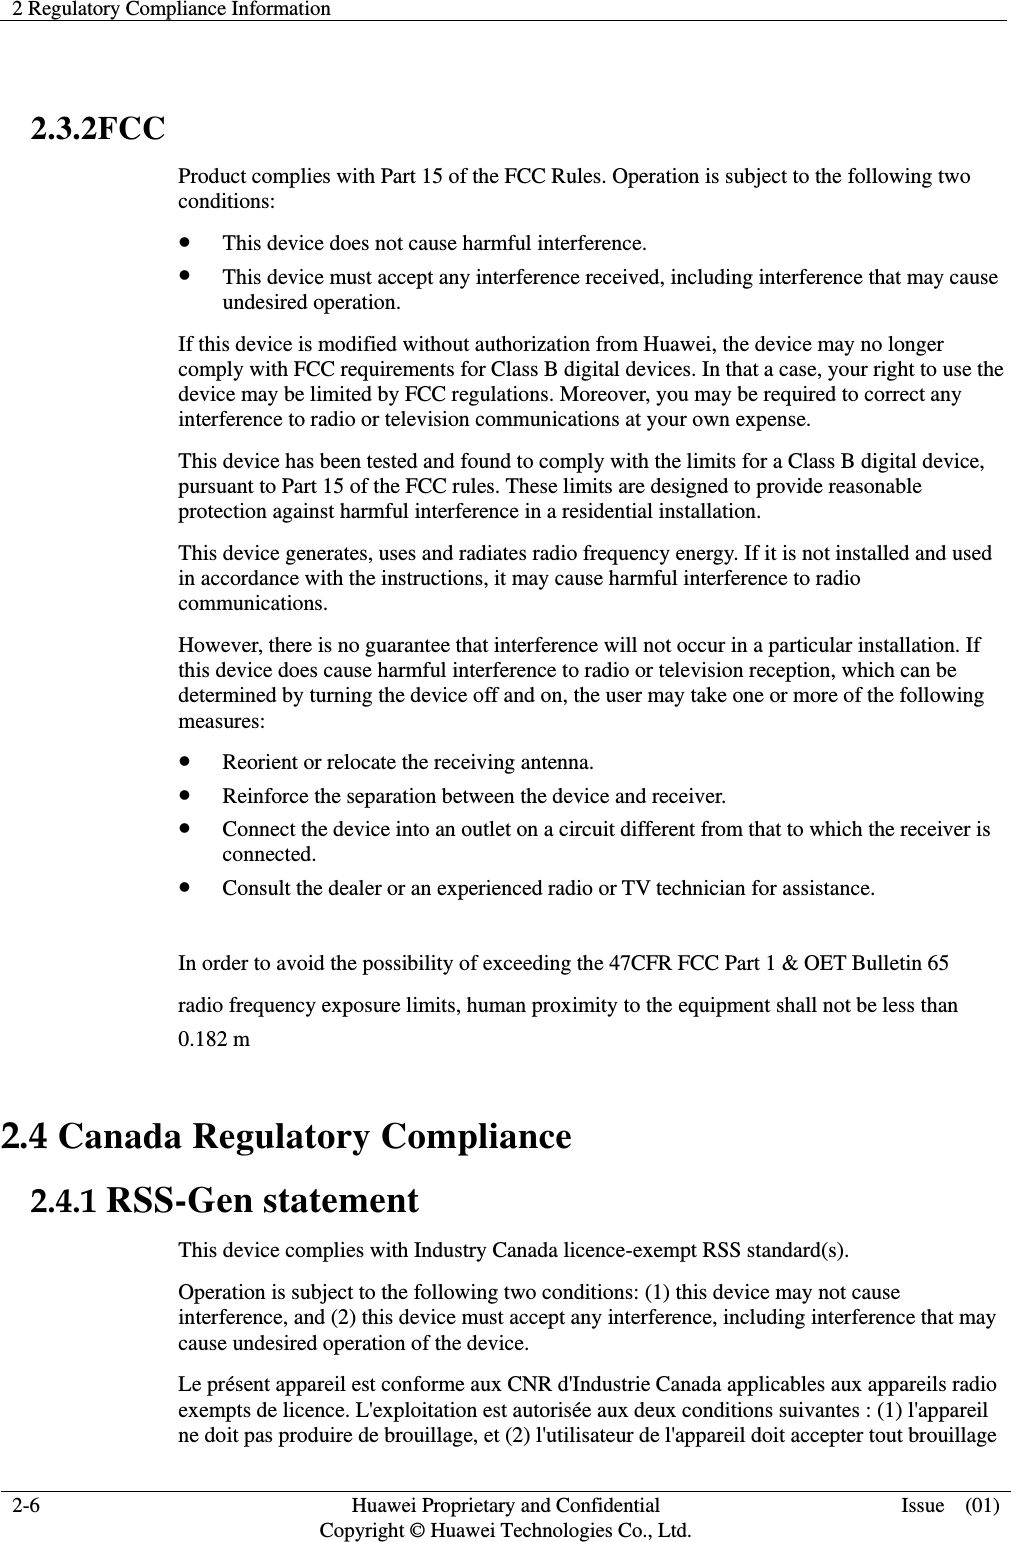 2 Regulatory Compliance Information    2-6 Huawei Proprietary and Confidential                                     Copyright © Huawei Technologies Co., Ltd. Issue    (01)   2.3.2FCC   Product complies with Part 15 of the FCC Rules. Operation is subject to the following two conditions:  This device does not cause harmful interference.  This device must accept any interference received, including interference that may cause undesired operation. If this device is modified without authorization from Huawei, the device may no longer comply with FCC requirements for Class B digital devices. In that a case, your right to use the device may be limited by FCC regulations. Moreover, you may be required to correct any interference to radio or television communications at your own expense. This device has been tested and found to comply with the limits for a Class B digital device, pursuant to Part 15 of the FCC rules. These limits are designed to provide reasonable protection against harmful interference in a residential installation. This device generates, uses and radiates radio frequency energy. If it is not installed and used in accordance with the instructions, it may cause harmful interference to radio communications. However, there is no guarantee that interference will not occur in a particular installation. If this device does cause harmful interference to radio or television reception, which can be determined by turning the device off and on, the user may take one or more of the following measures:  Reorient or relocate the receiving antenna.  Reinforce the separation between the device and receiver.  Connect the device into an outlet on a circuit different from that to which the receiver is connected.  Consult the dealer or an experienced radio or TV technician for assistance.  In order to avoid the possibility of exceeding the 47CFR FCC Part 1 &amp; OET Bulletin 65 radio frequency exposure limits, human proximity to the equipment shall not be less than   0.182 m 2.4 Canada Regulatory Compliance 2.4.1 RSS-Gen statement This device complies with Industry Canada licence-exempt RSS standard(s). Operation is subject to the following two conditions: (1) this device may not cause interference, and (2) this device must accept any interference, including interference that may cause undesired operation of the device. Le présent appareil est conforme aux CNR d&apos;Industrie Canada applicables aux appareils radio exempts de licence. L&apos;exploitation est autorisée aux deux conditions suivantes : (1) l&apos;appareil ne doit pas produire de brouillage, et (2) l&apos;utilisateur de l&apos;appareil doit accepter tout brouillage 